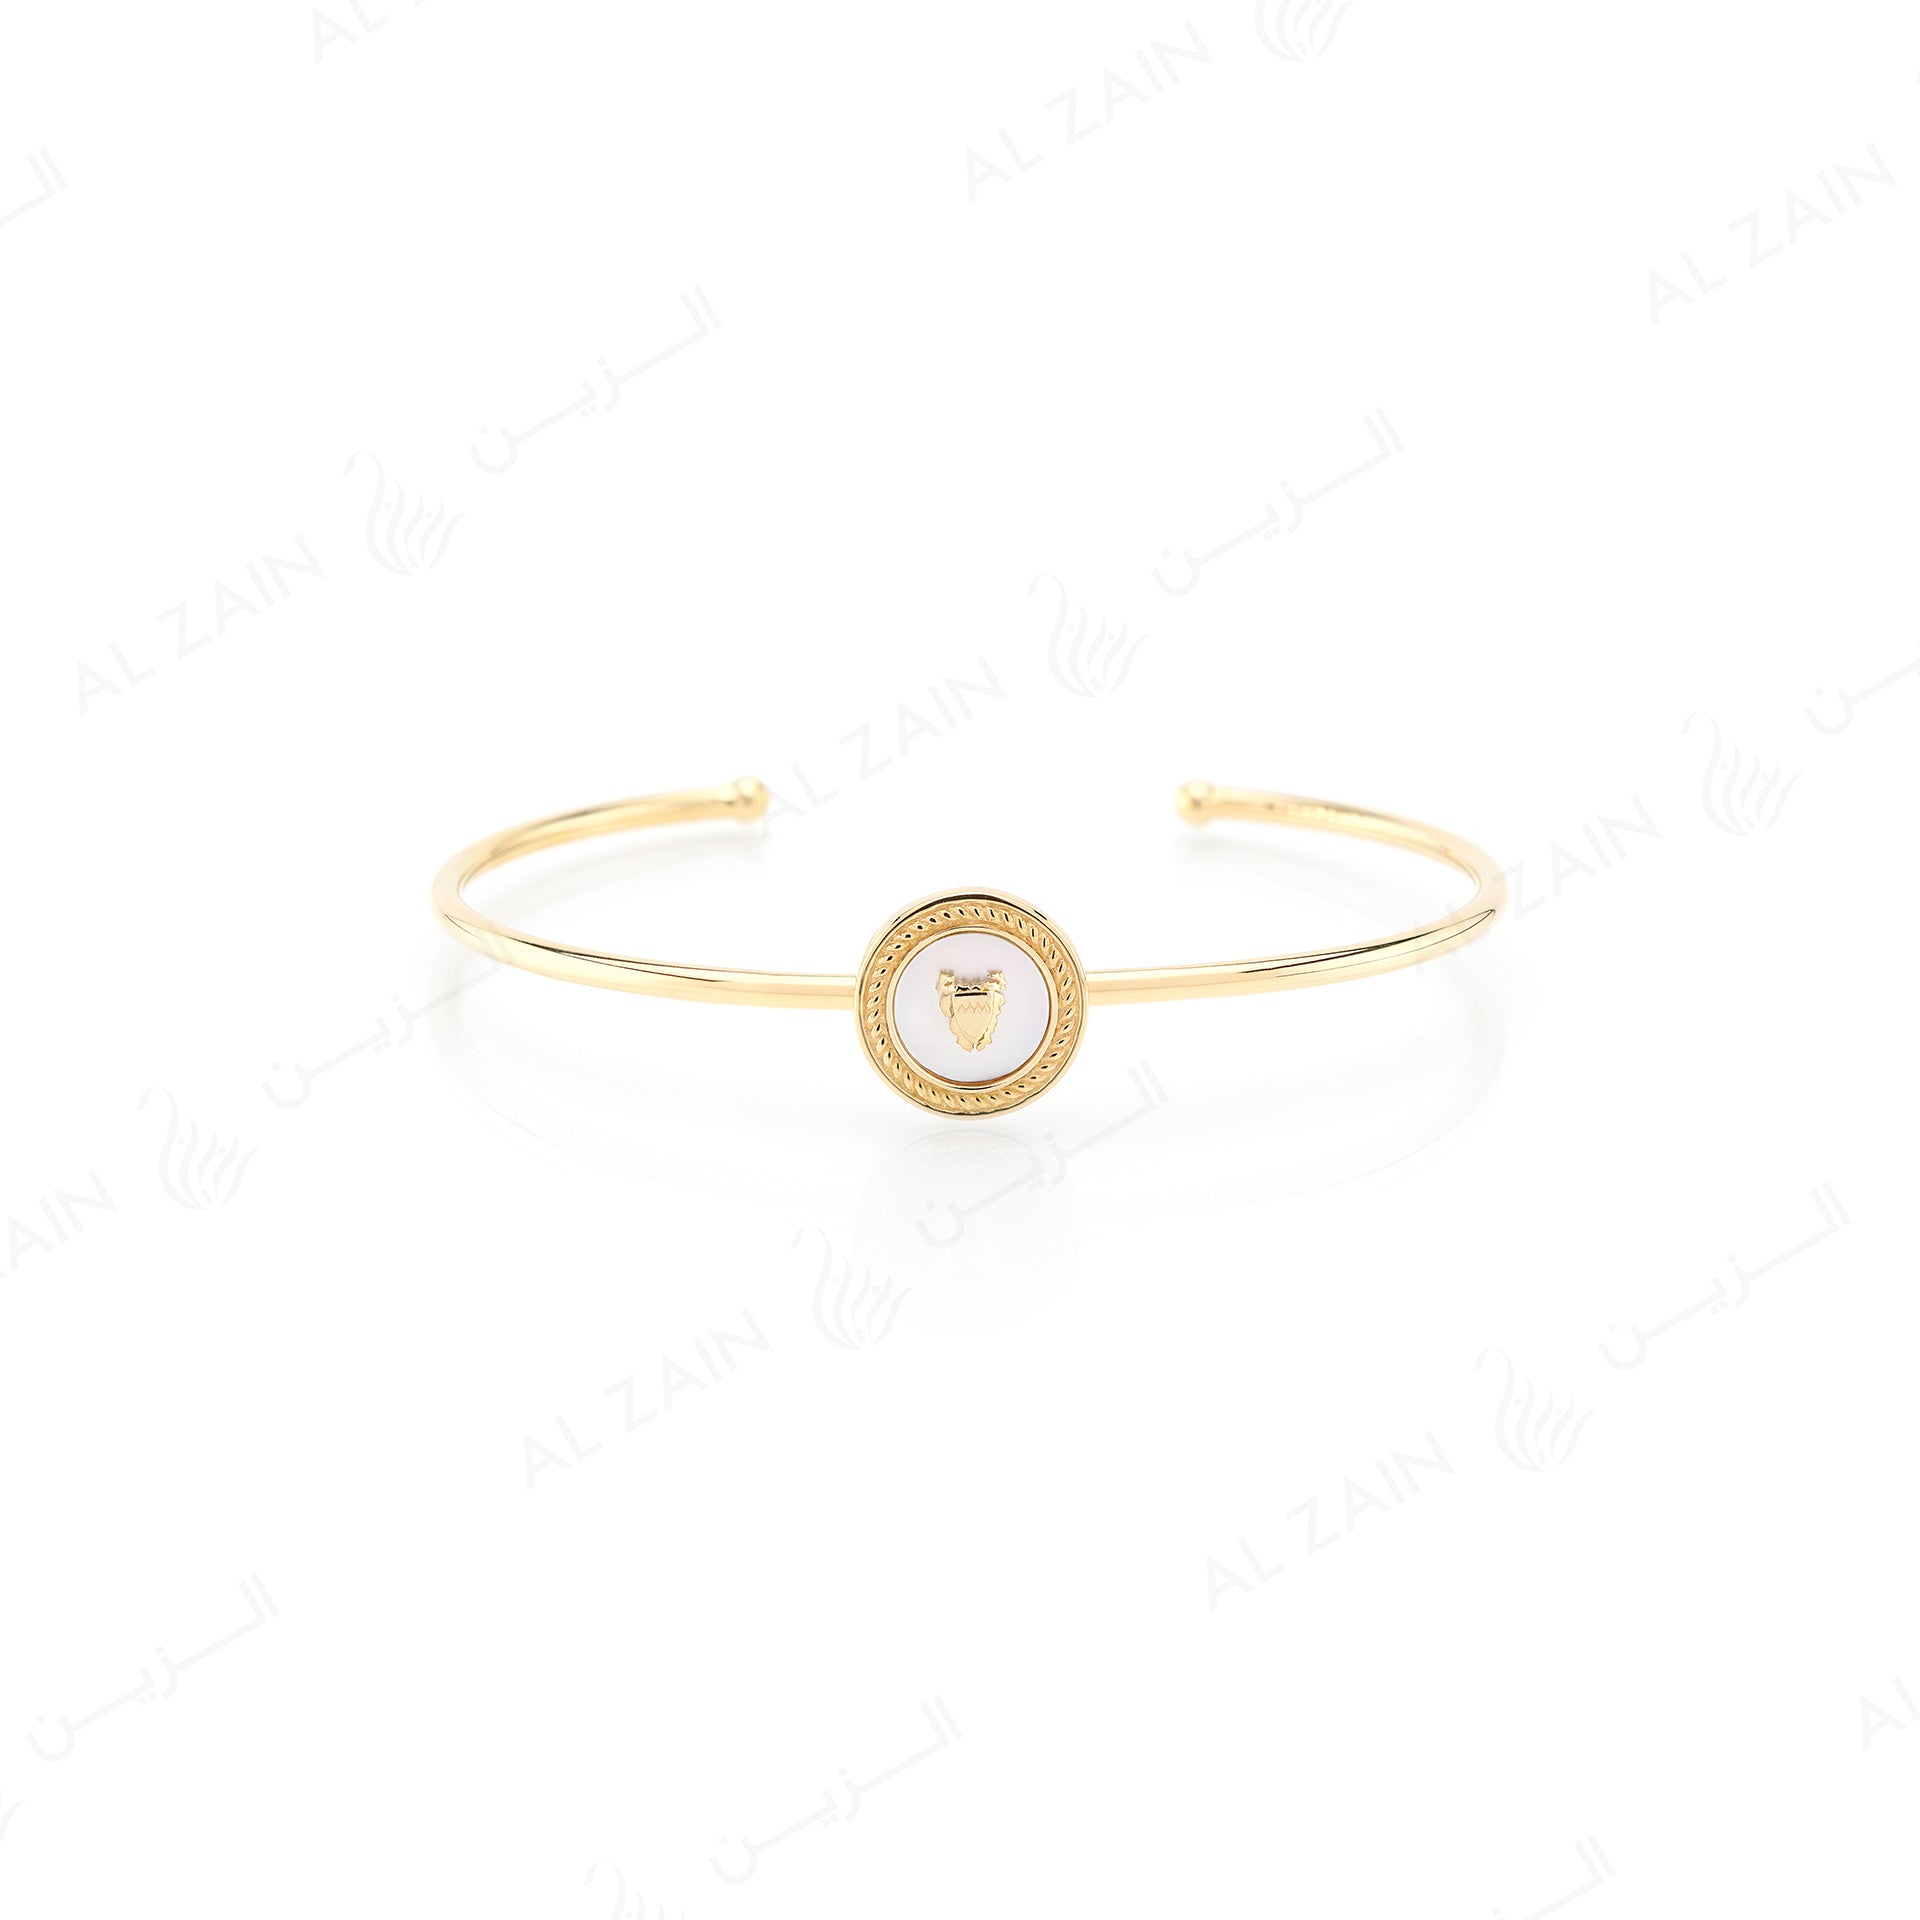 Bahrain Flag Bangle in 18k yellow gold with Mother of Pearl Stone